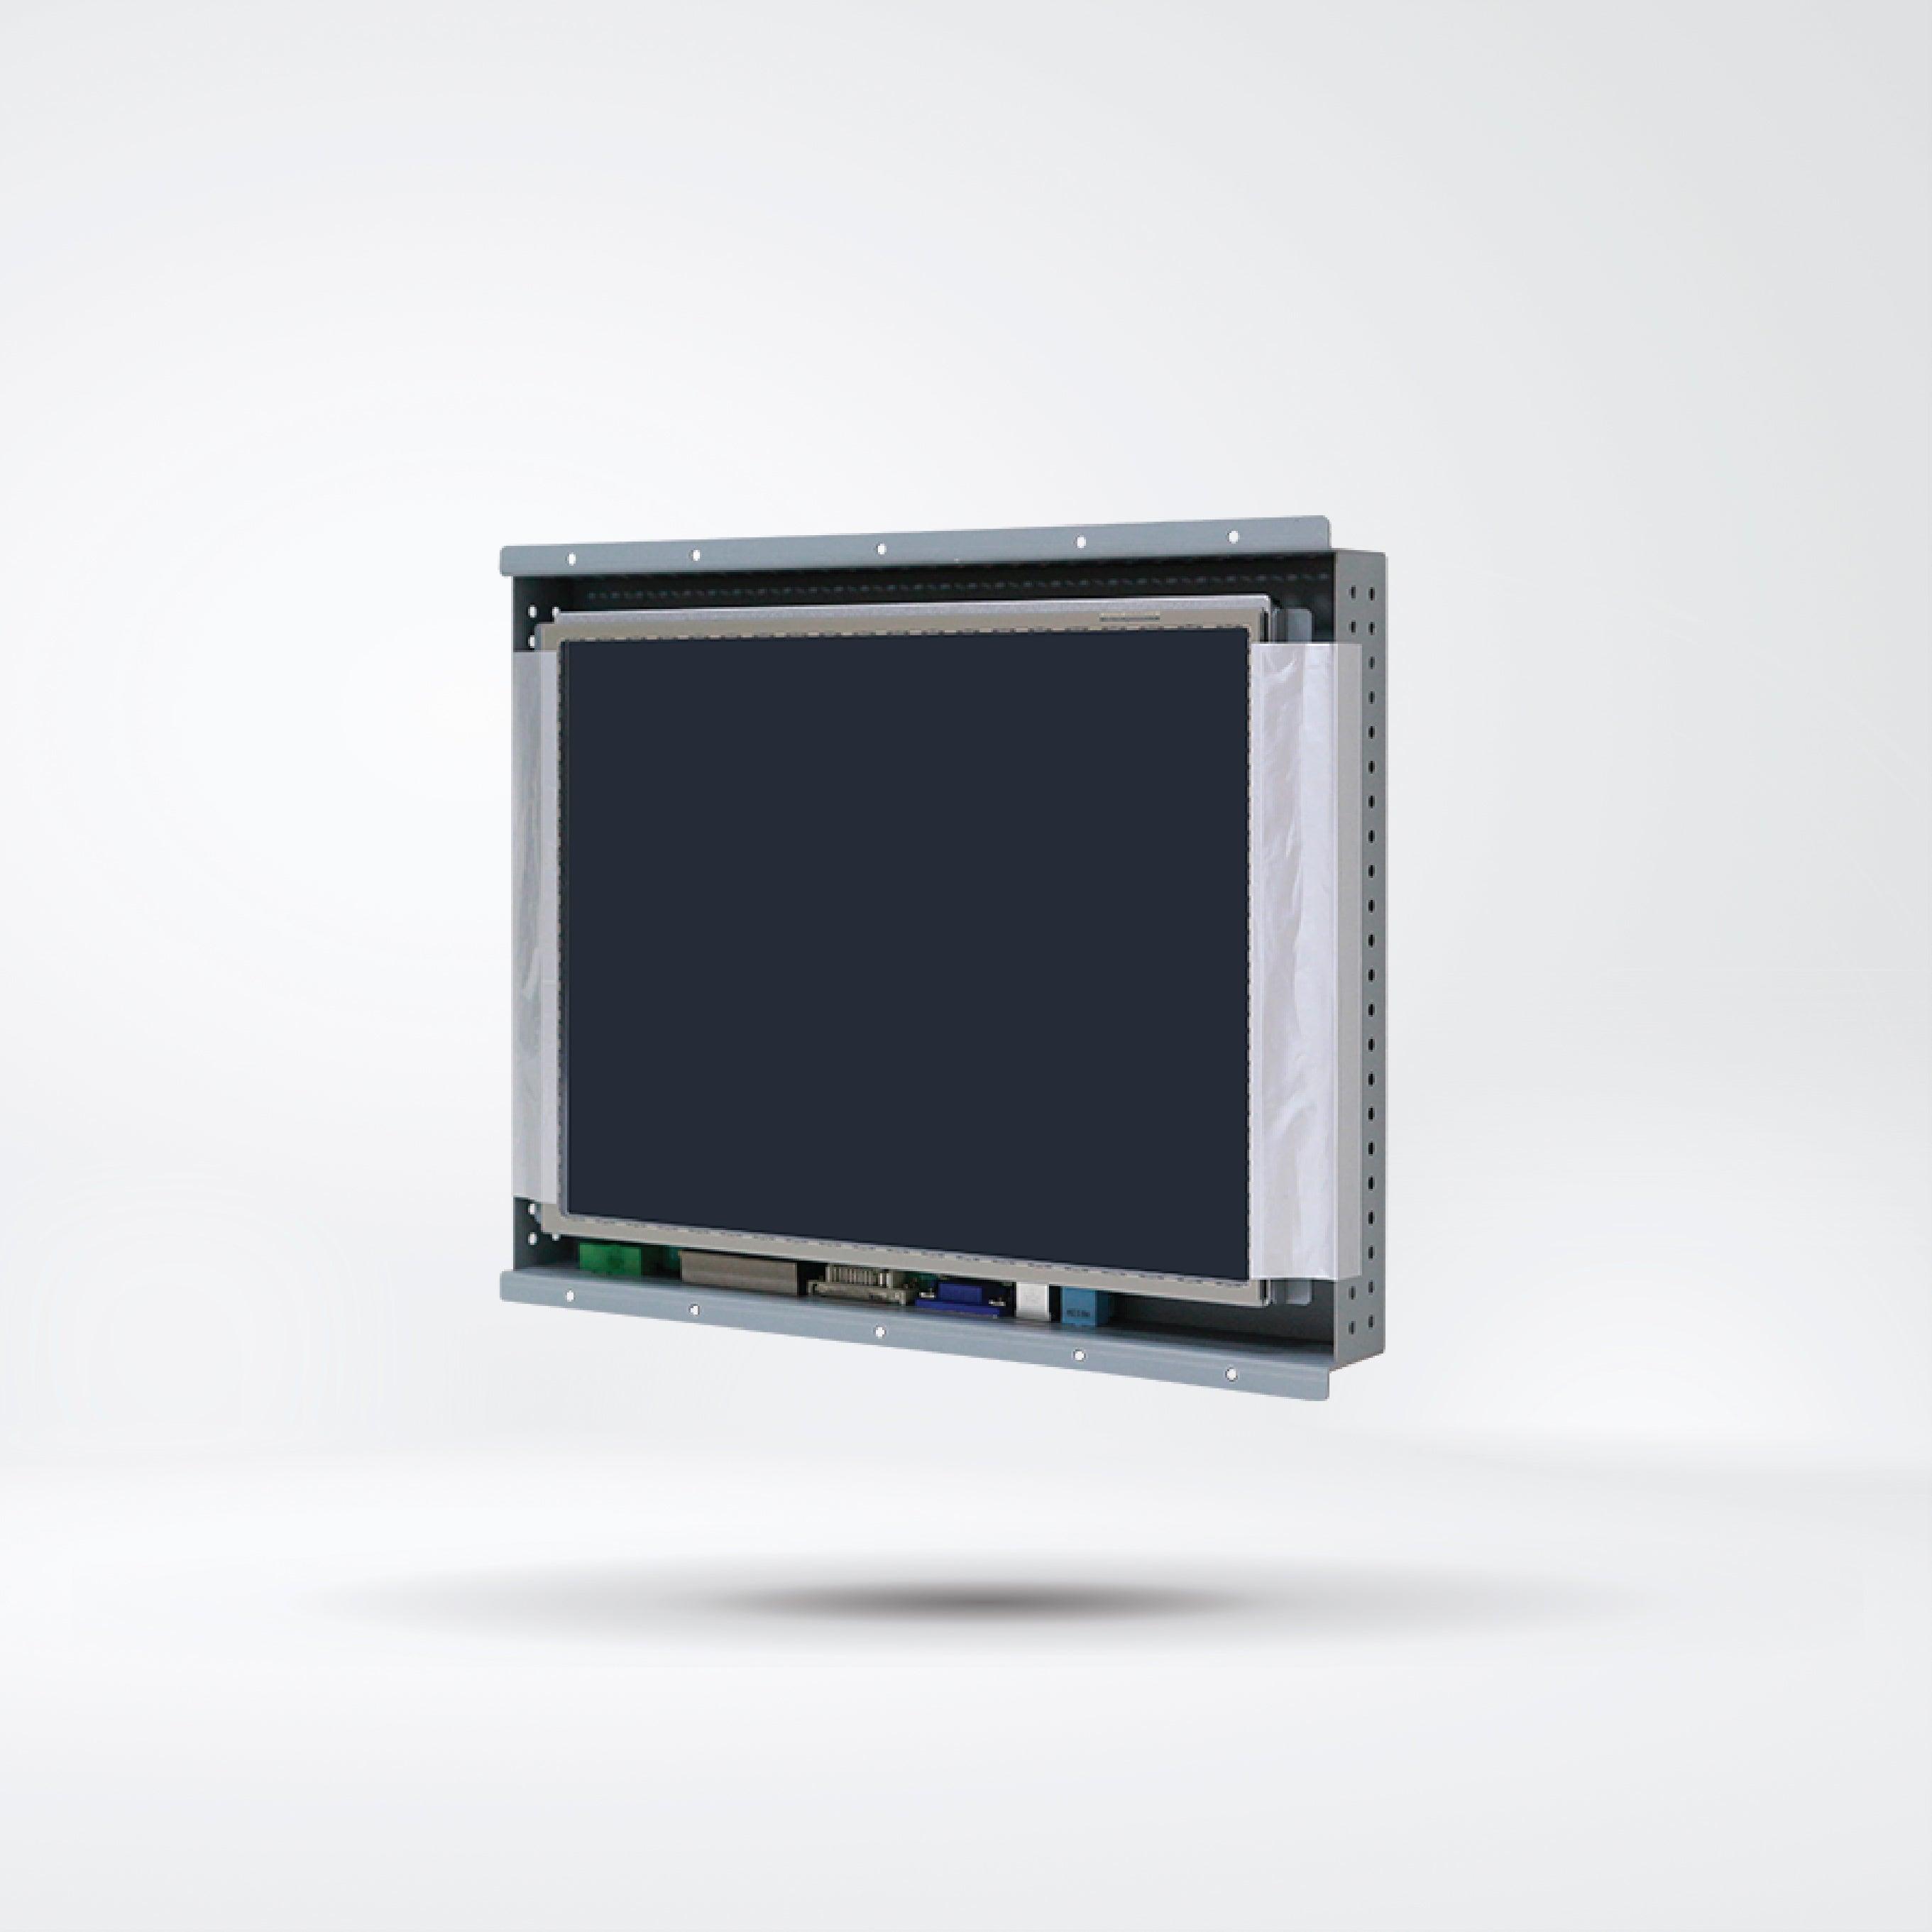 OPD-1126A 12.1" Open Frame Design Industrial Display - Riverplus